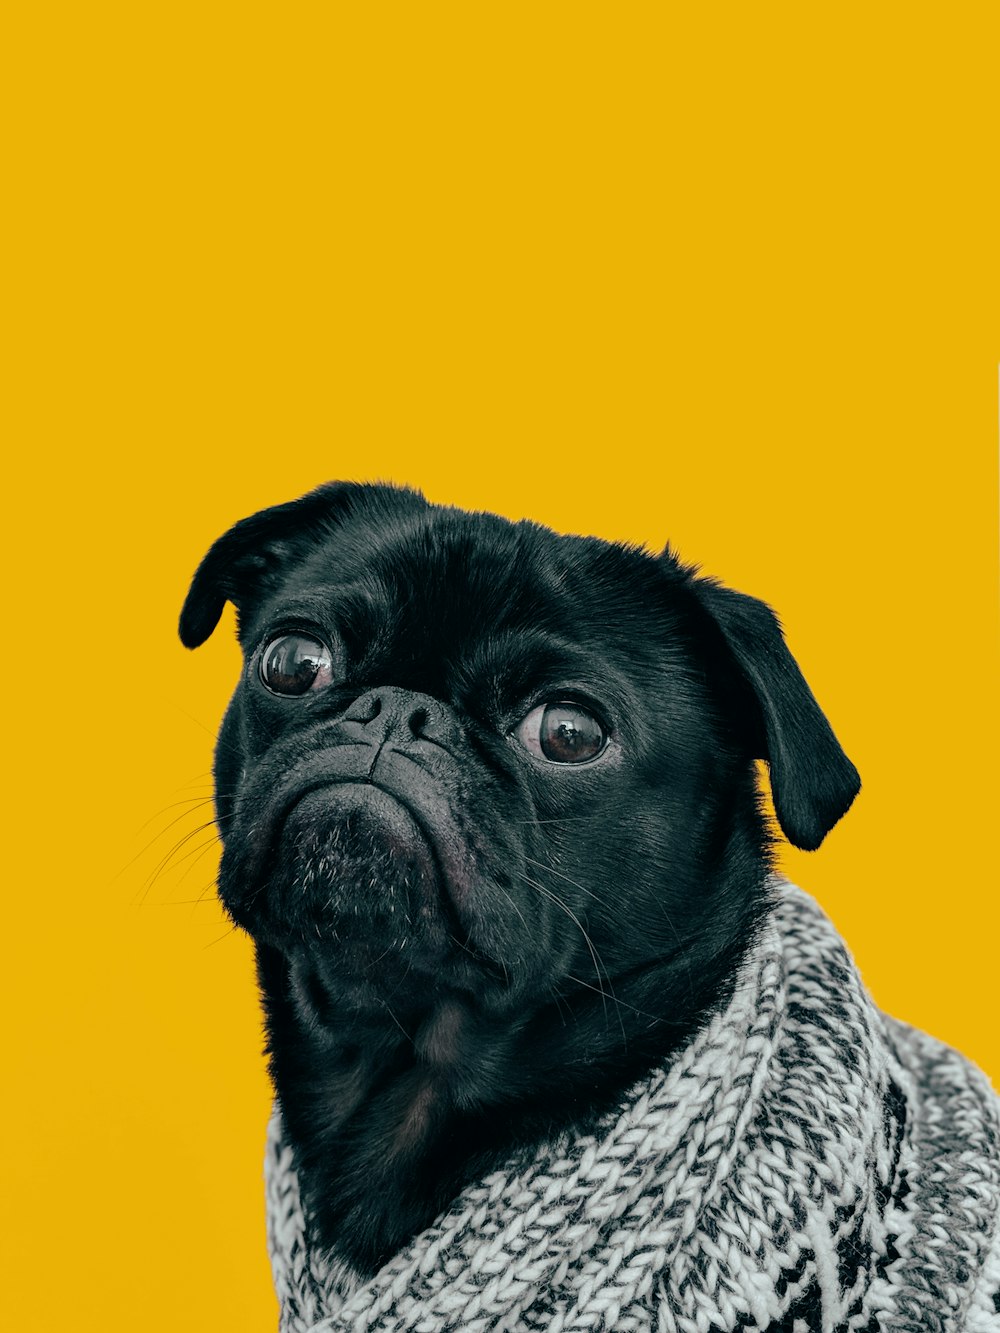 Background Wallpapers on WallpaperDog